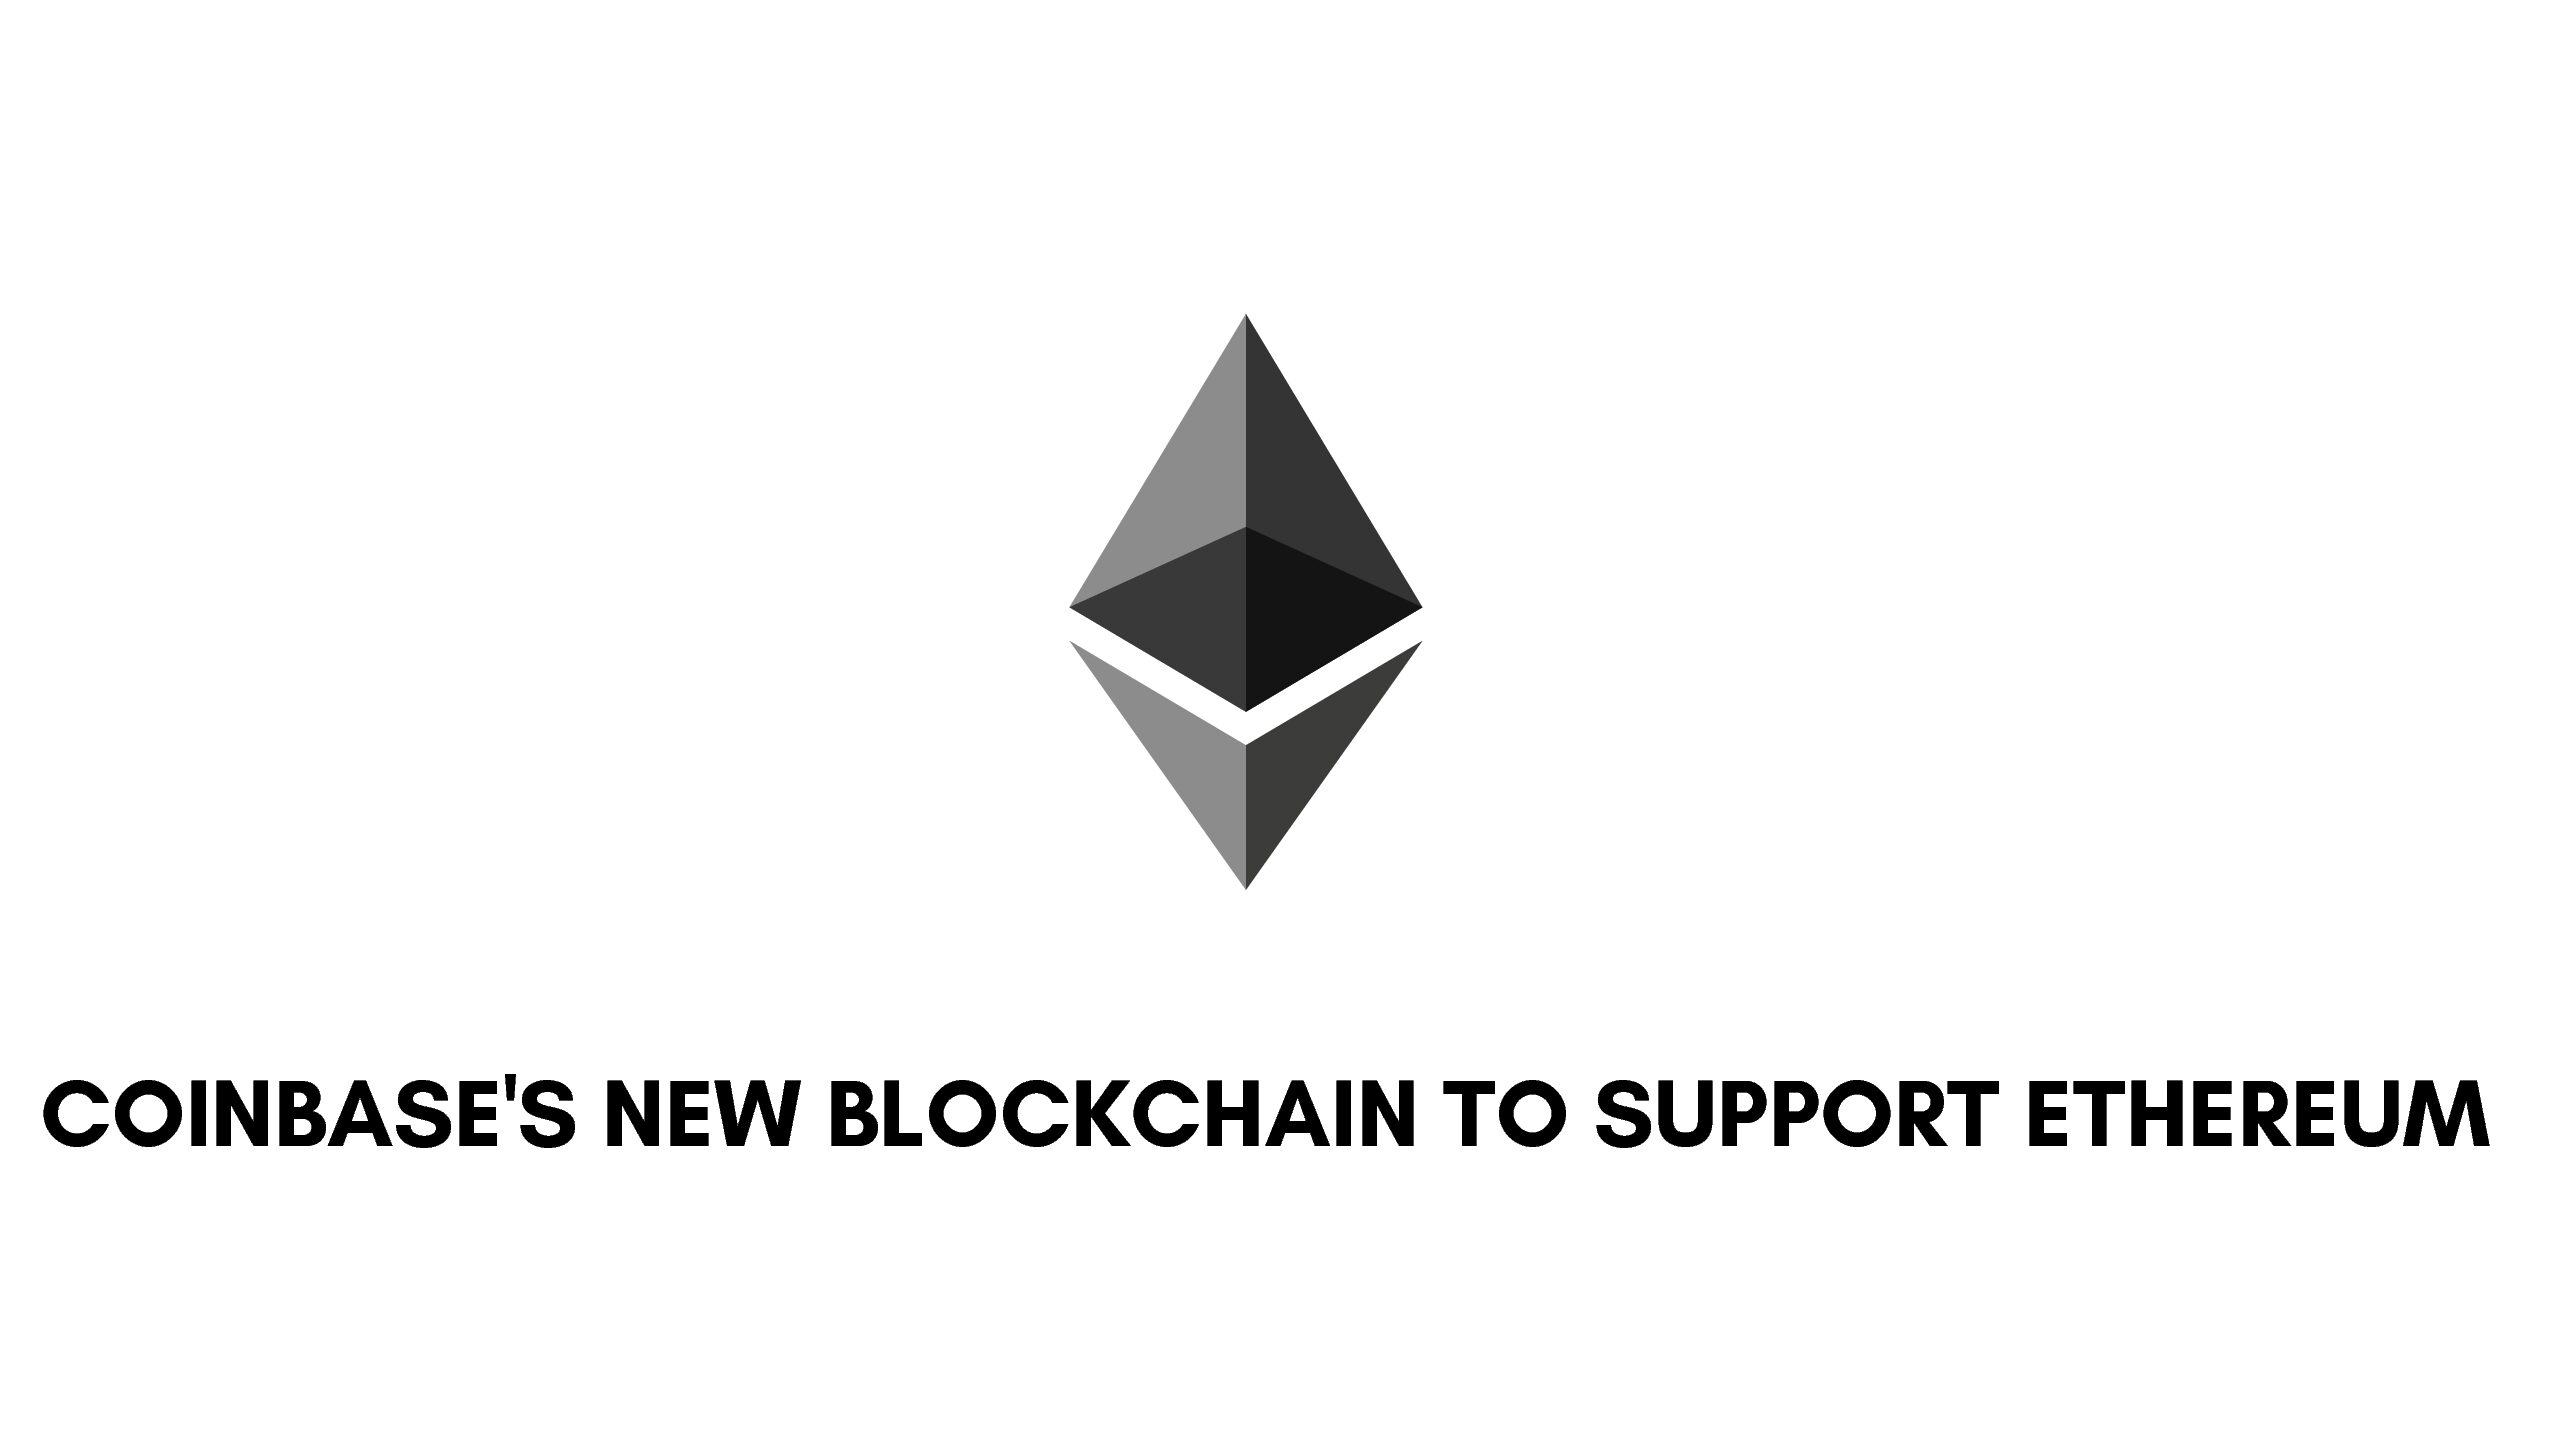 Coinbase’s new blockchain to support Ethereum.